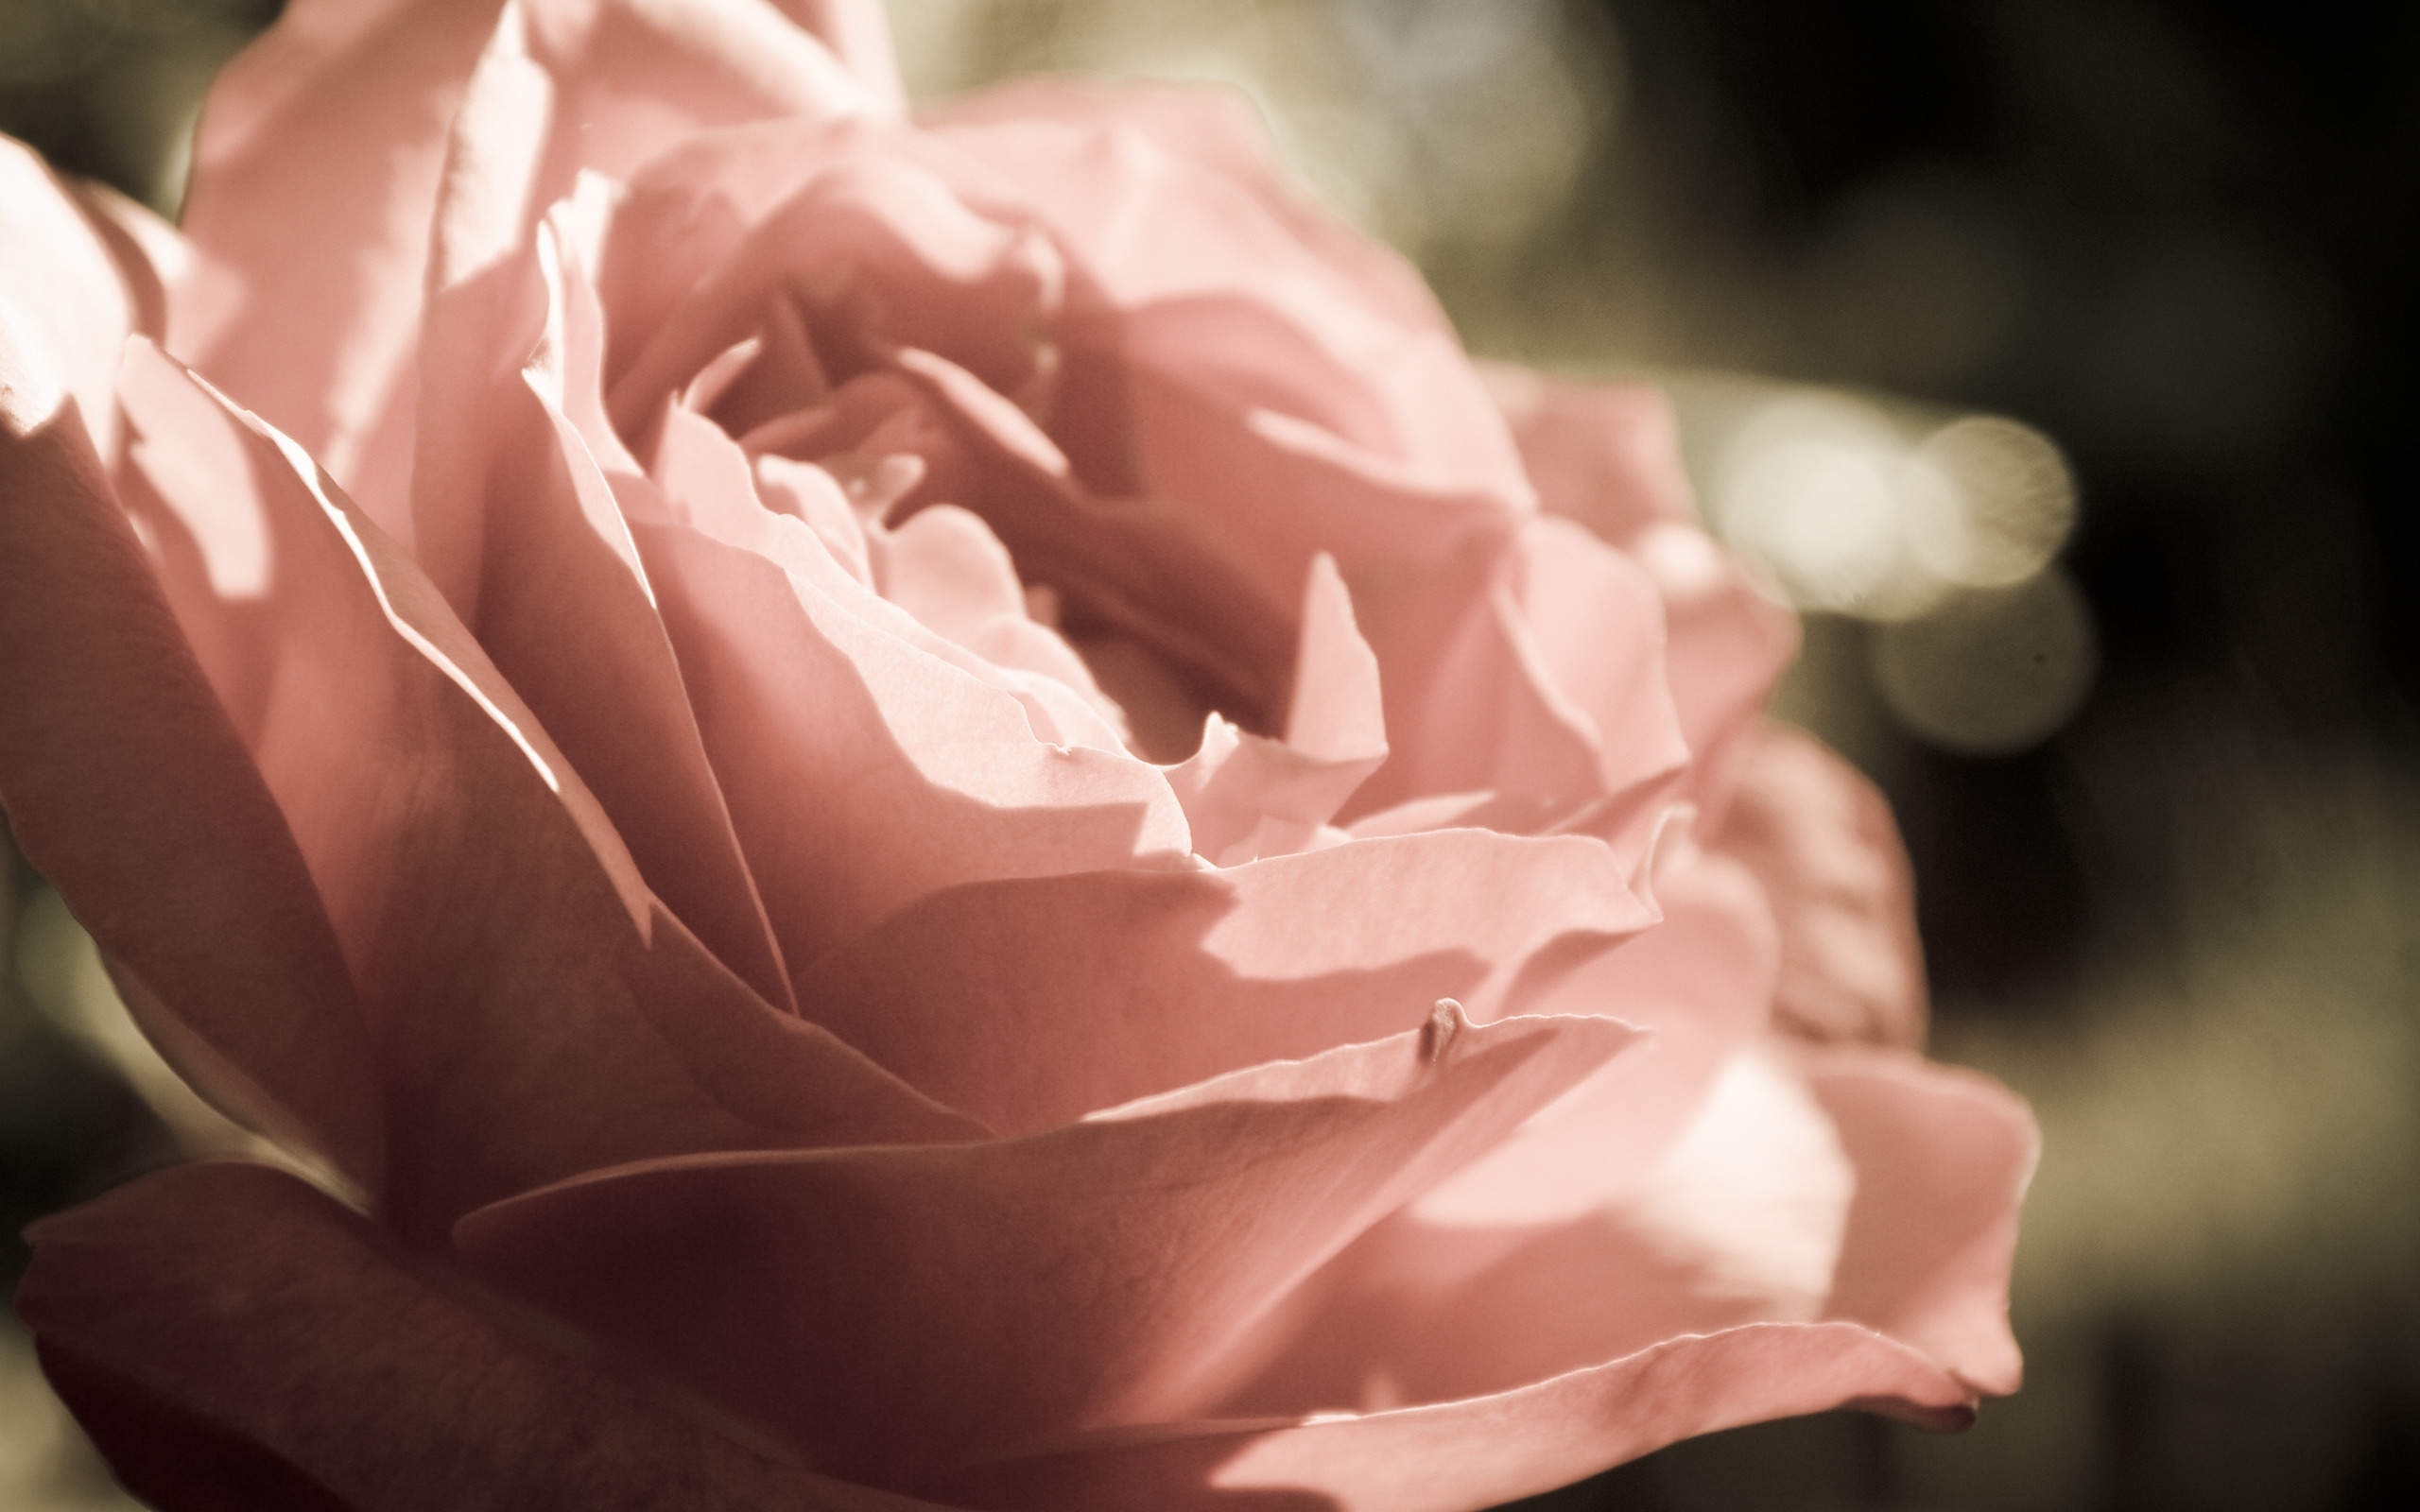 28982 3840x1080 PC pictures for free, download roses, red, plants, flowers 3840x1080 wallpapers on your desktop